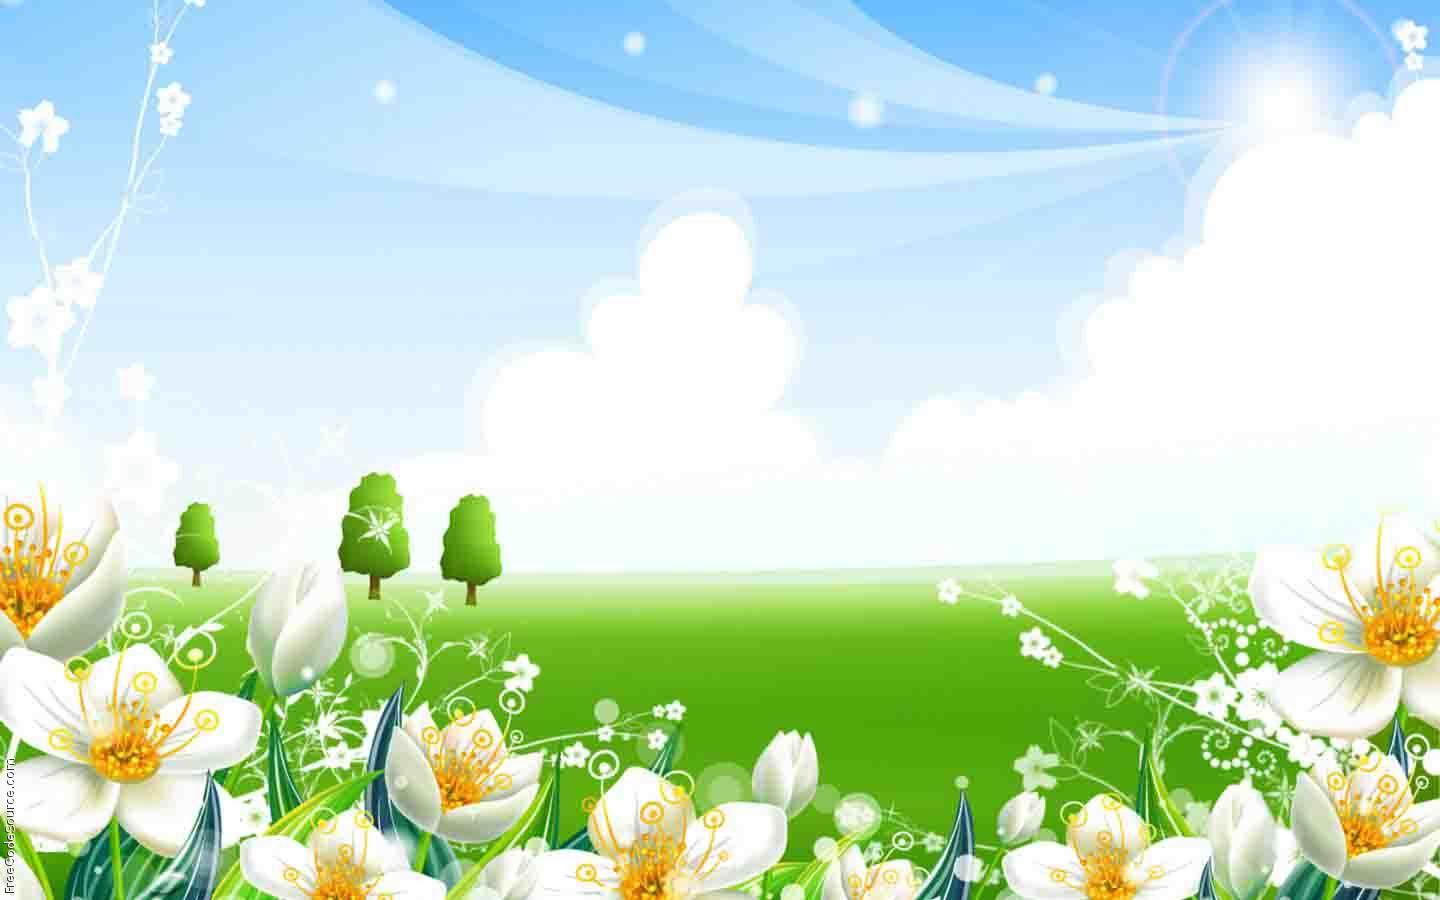 Download Background Flowers Wallpaper High Quality Widescreen